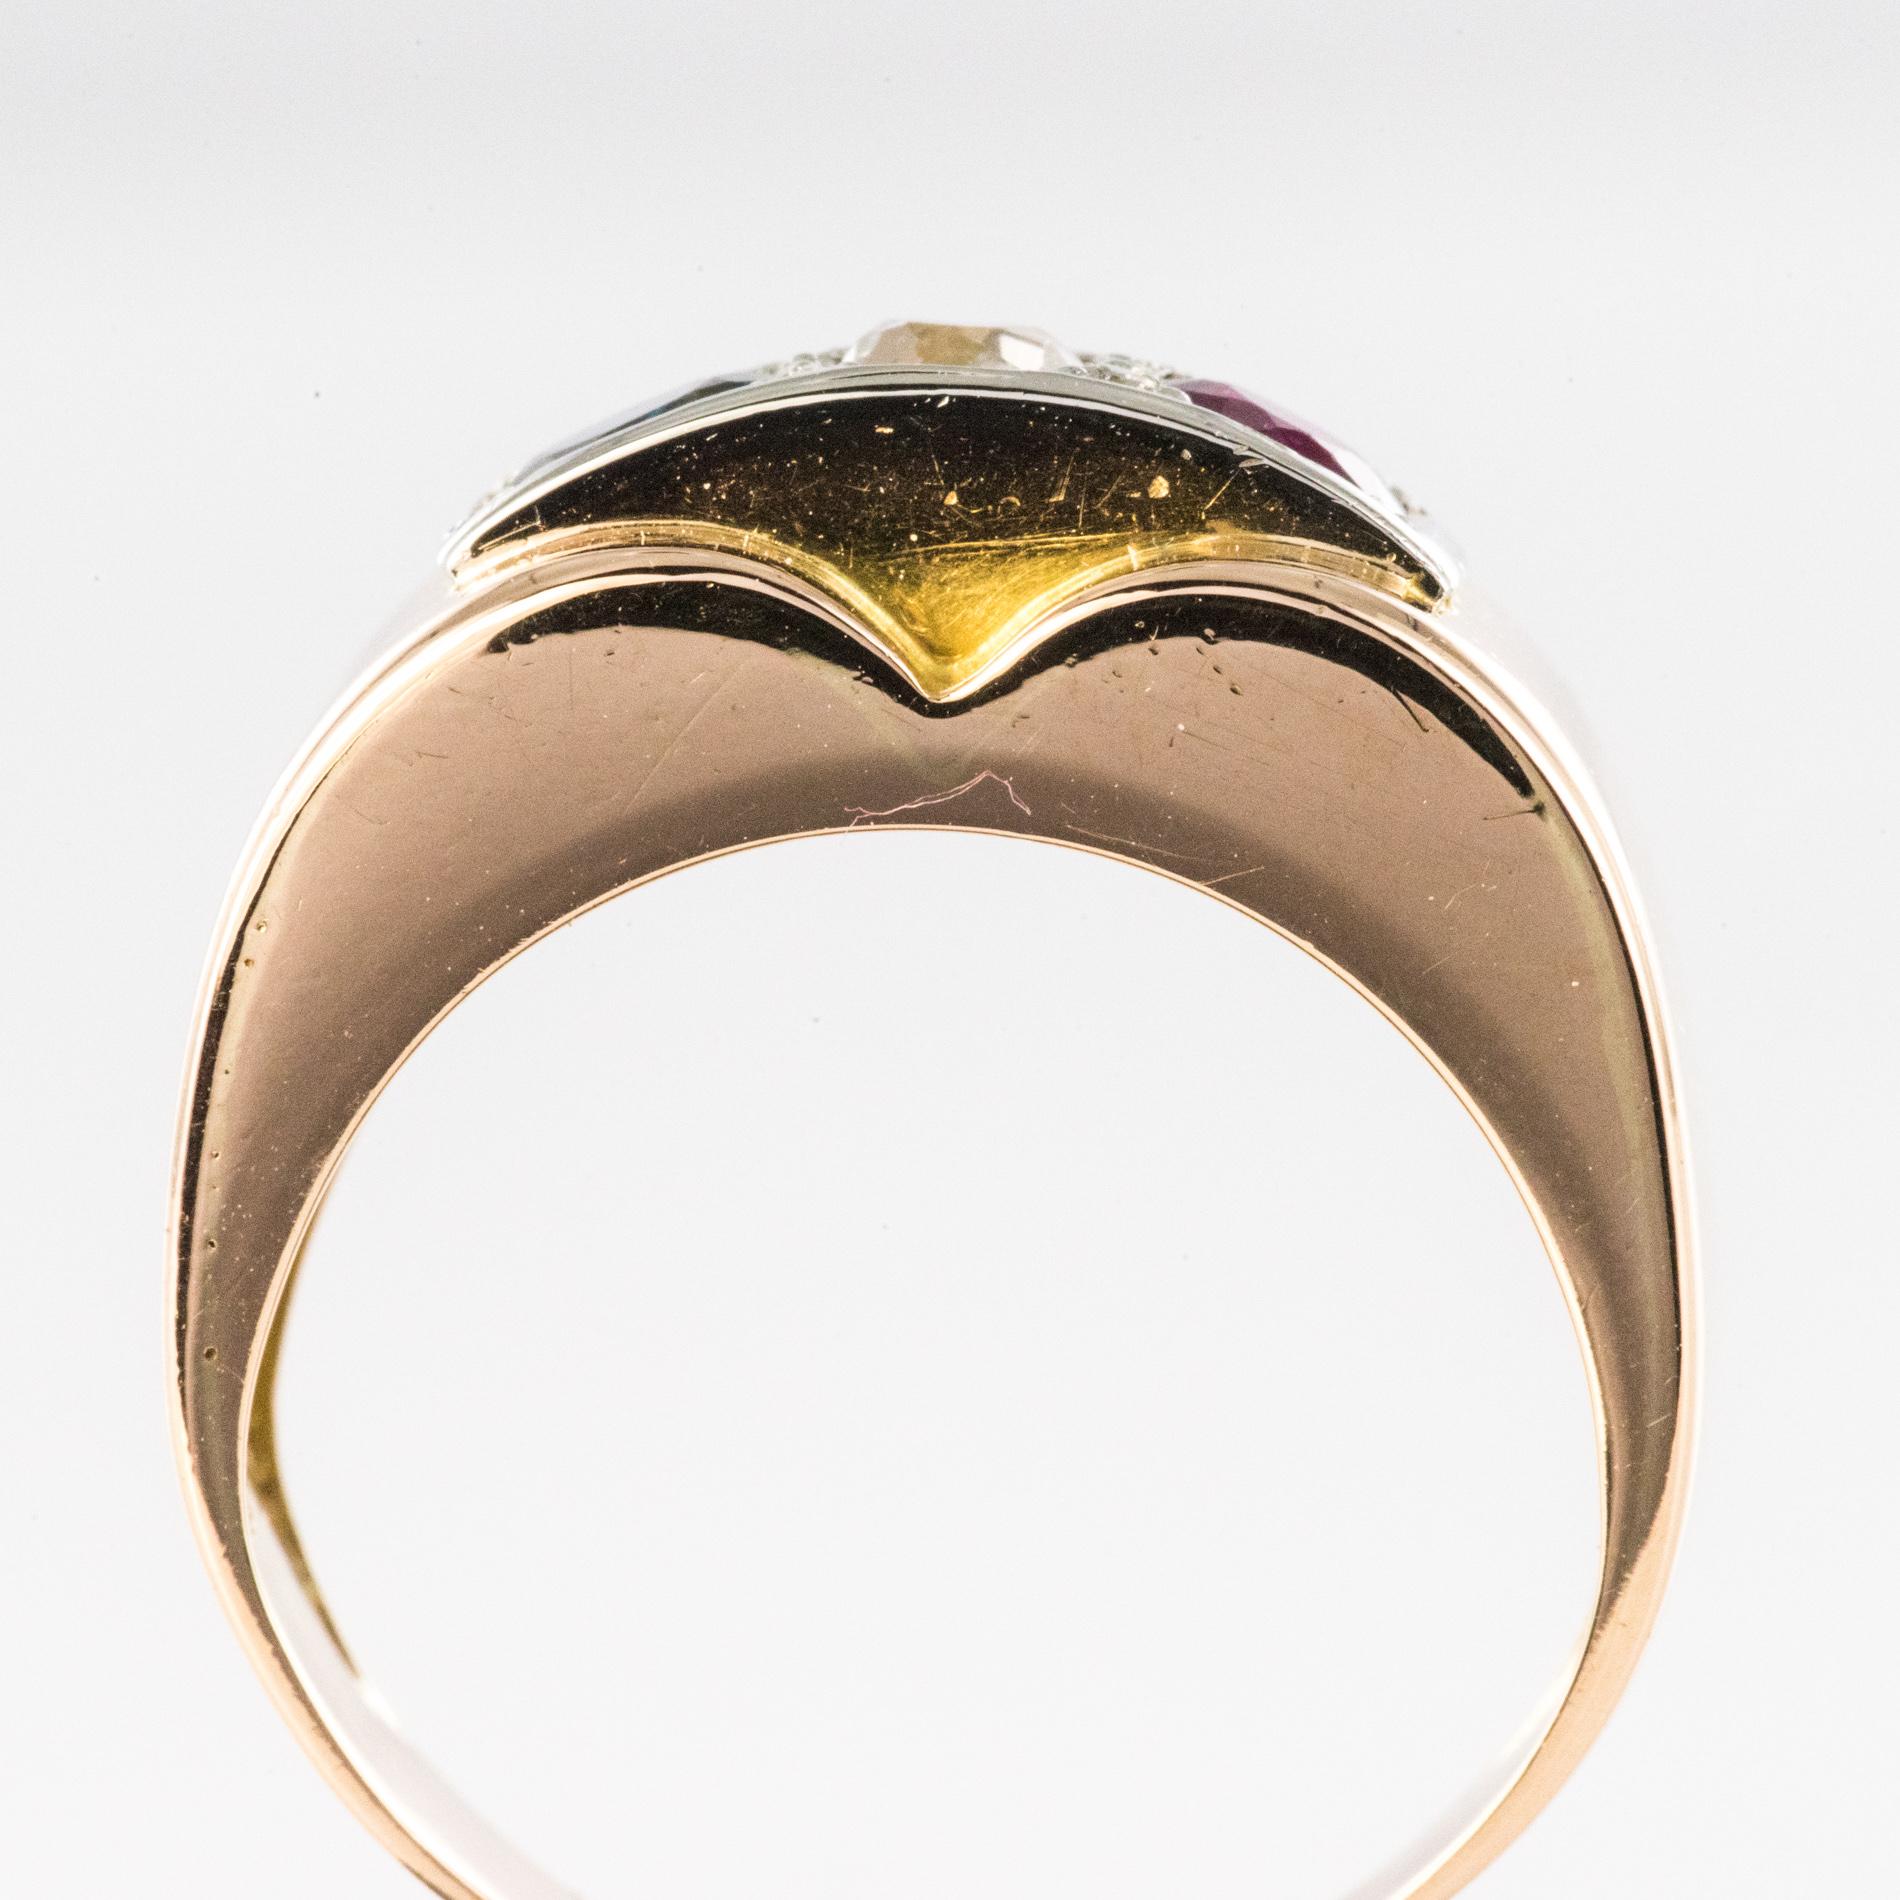 French 1940s Ruby Diamond Sapphire 18 Karat Yellow Gold Patriotic Tank Ring For Sale 9